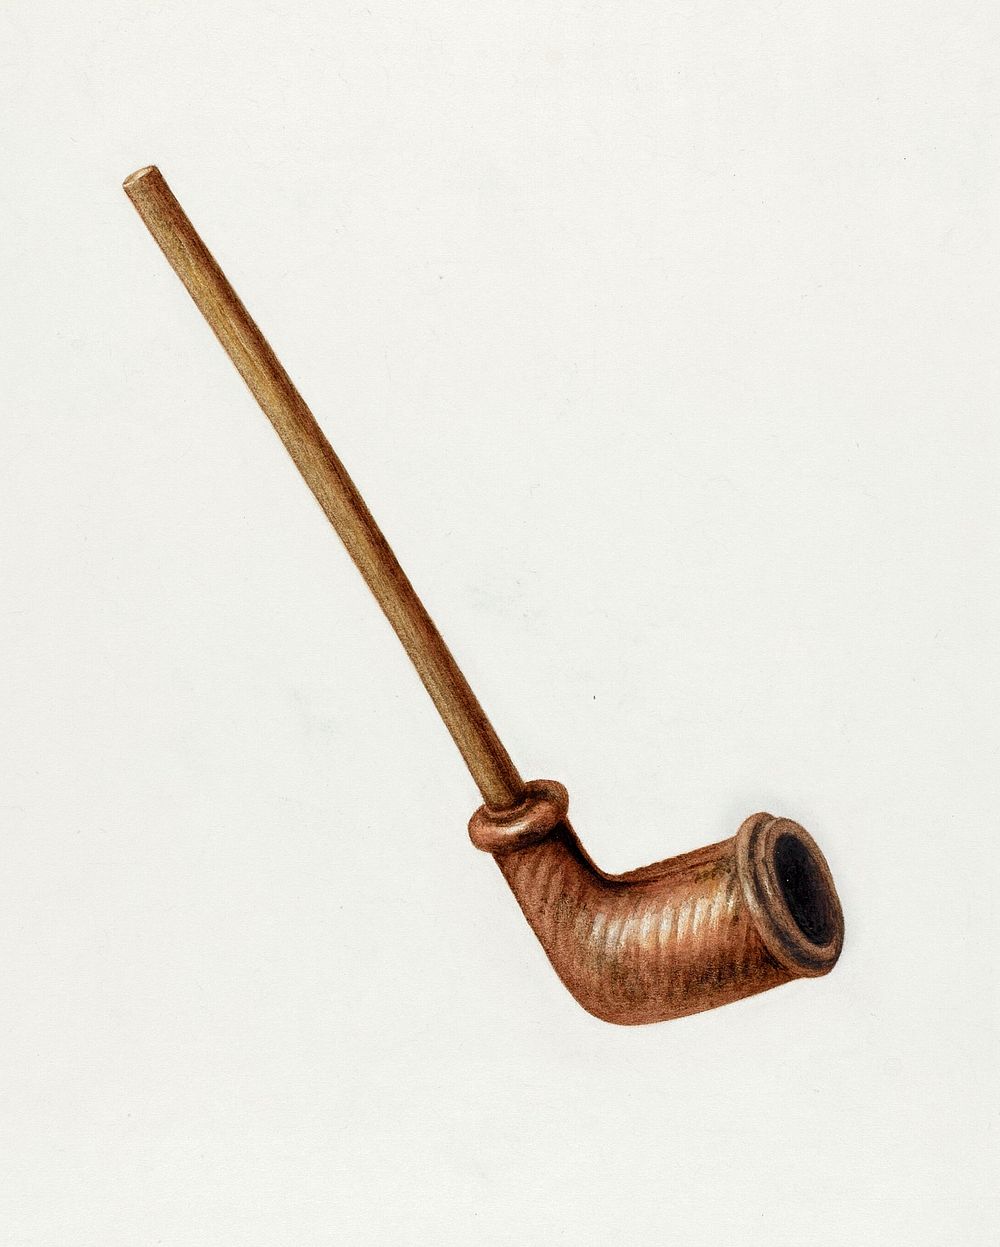 Clay Pipe (ca. 1938) by Manuel G. Runyan. Original from The National Gallery of Art. Digitally enhanced by rawpixel.